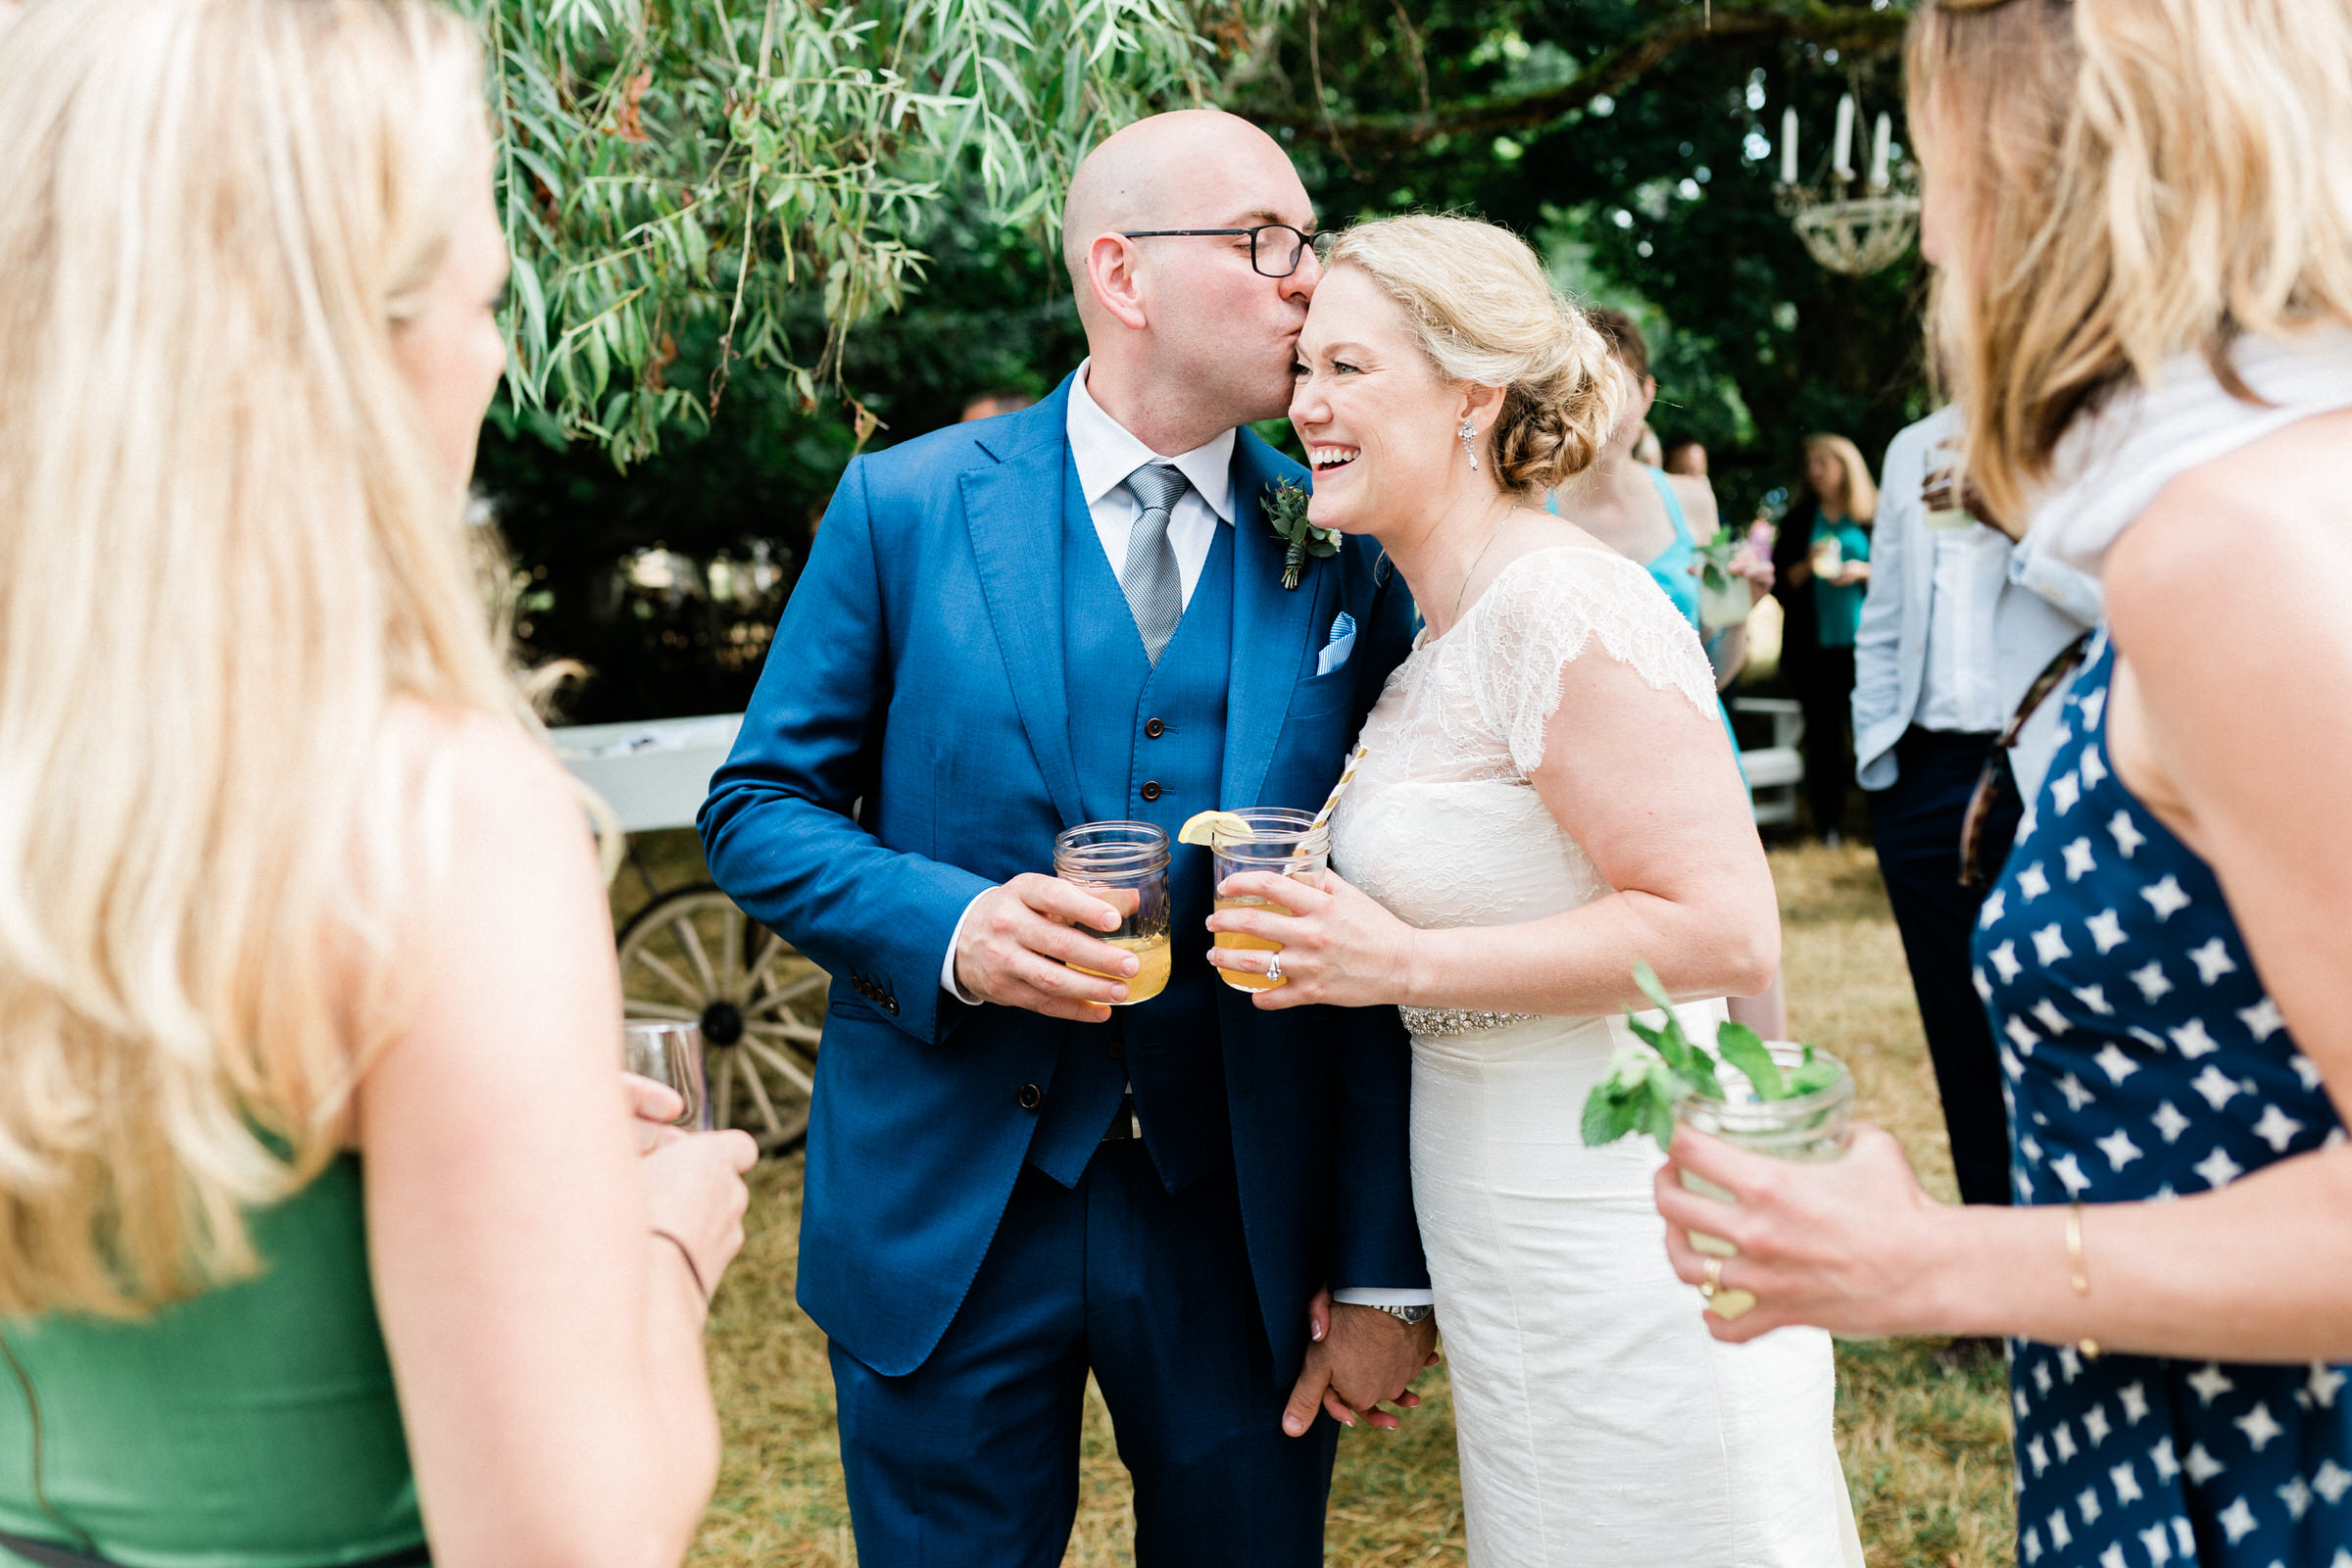 Wayfarer Whidbey Island Wedding: Groom Joe gives bride Sara a kiss while chatting with their guests